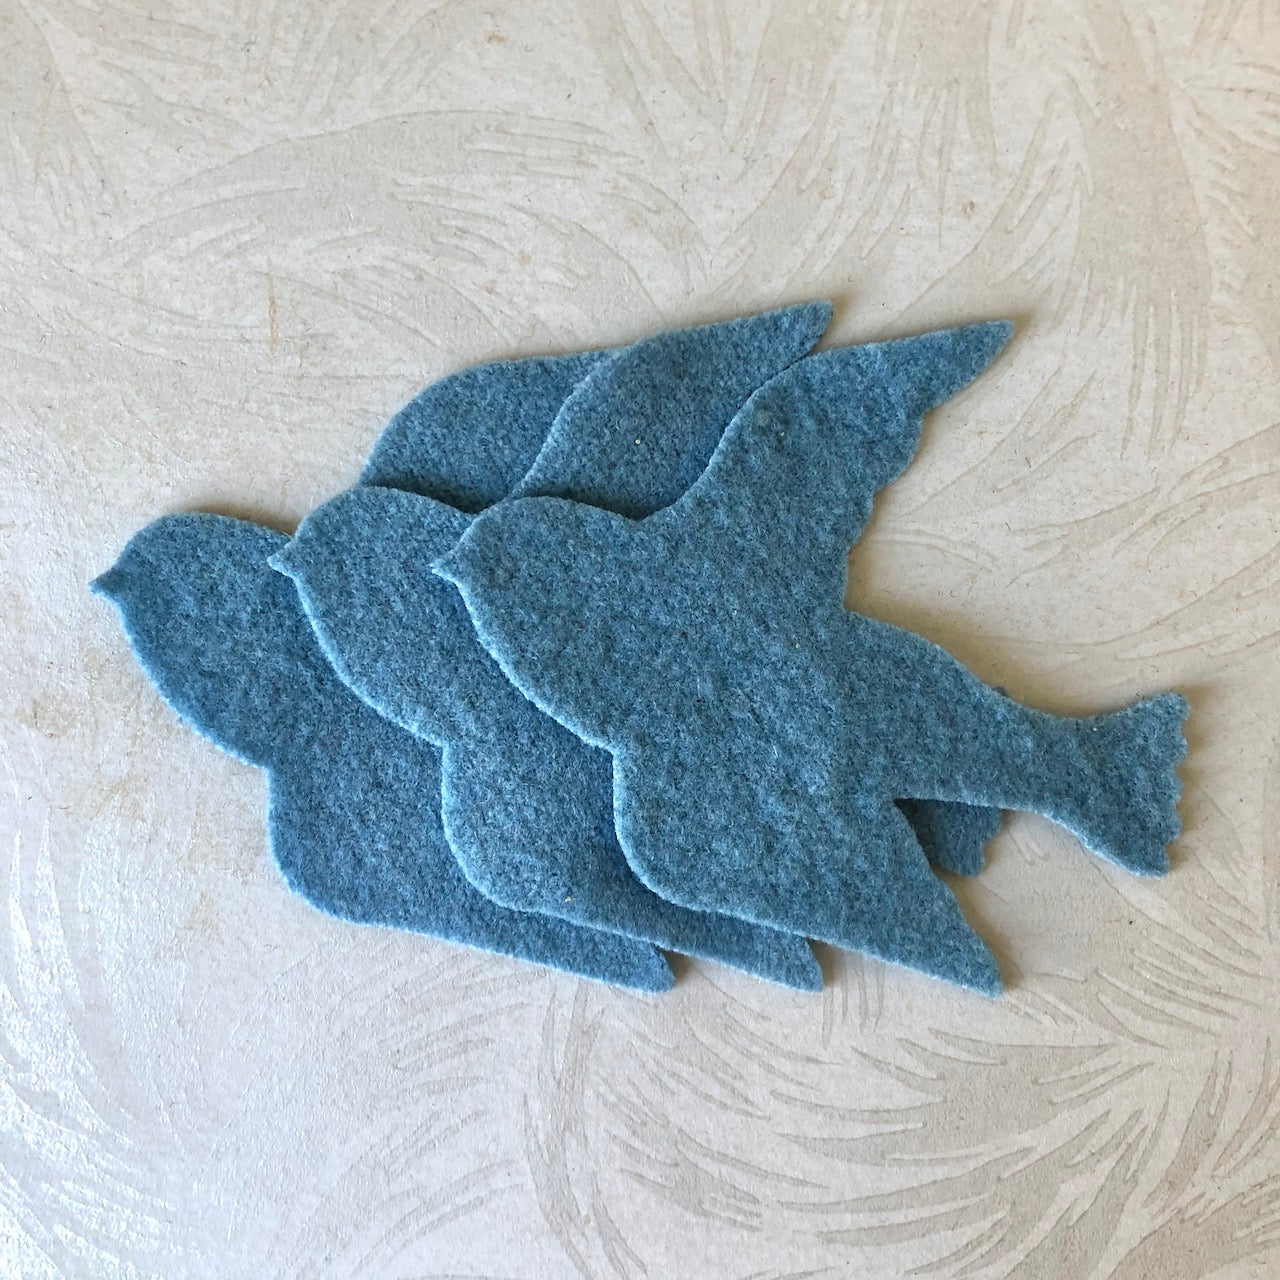 Blue Birds Felted Wool Shapes